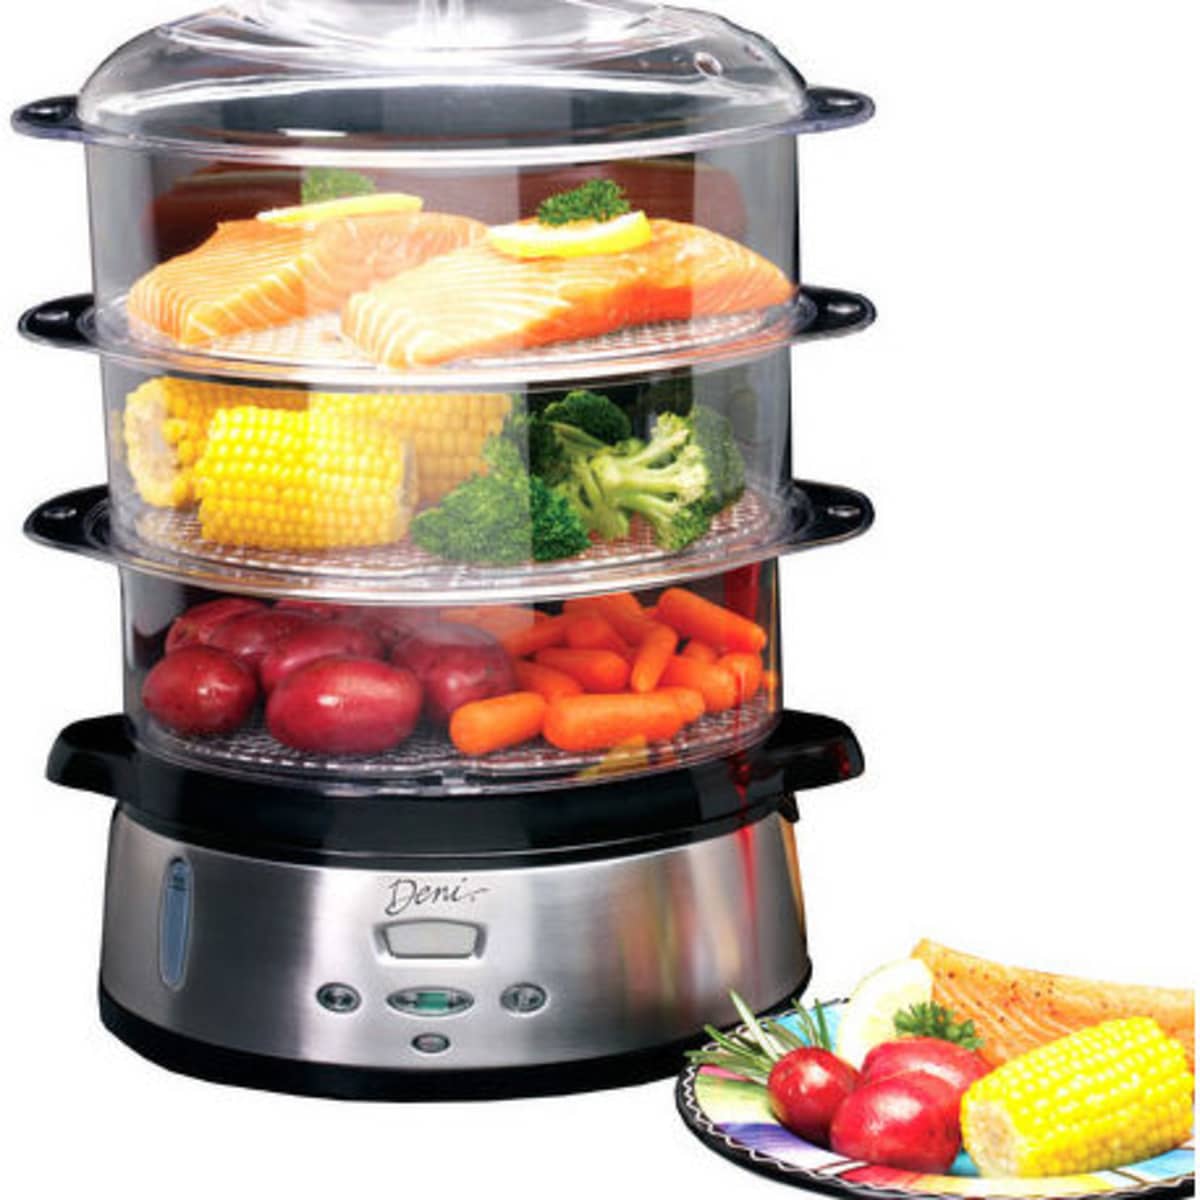 How Long To Steam Vegetables In Electric Steamer